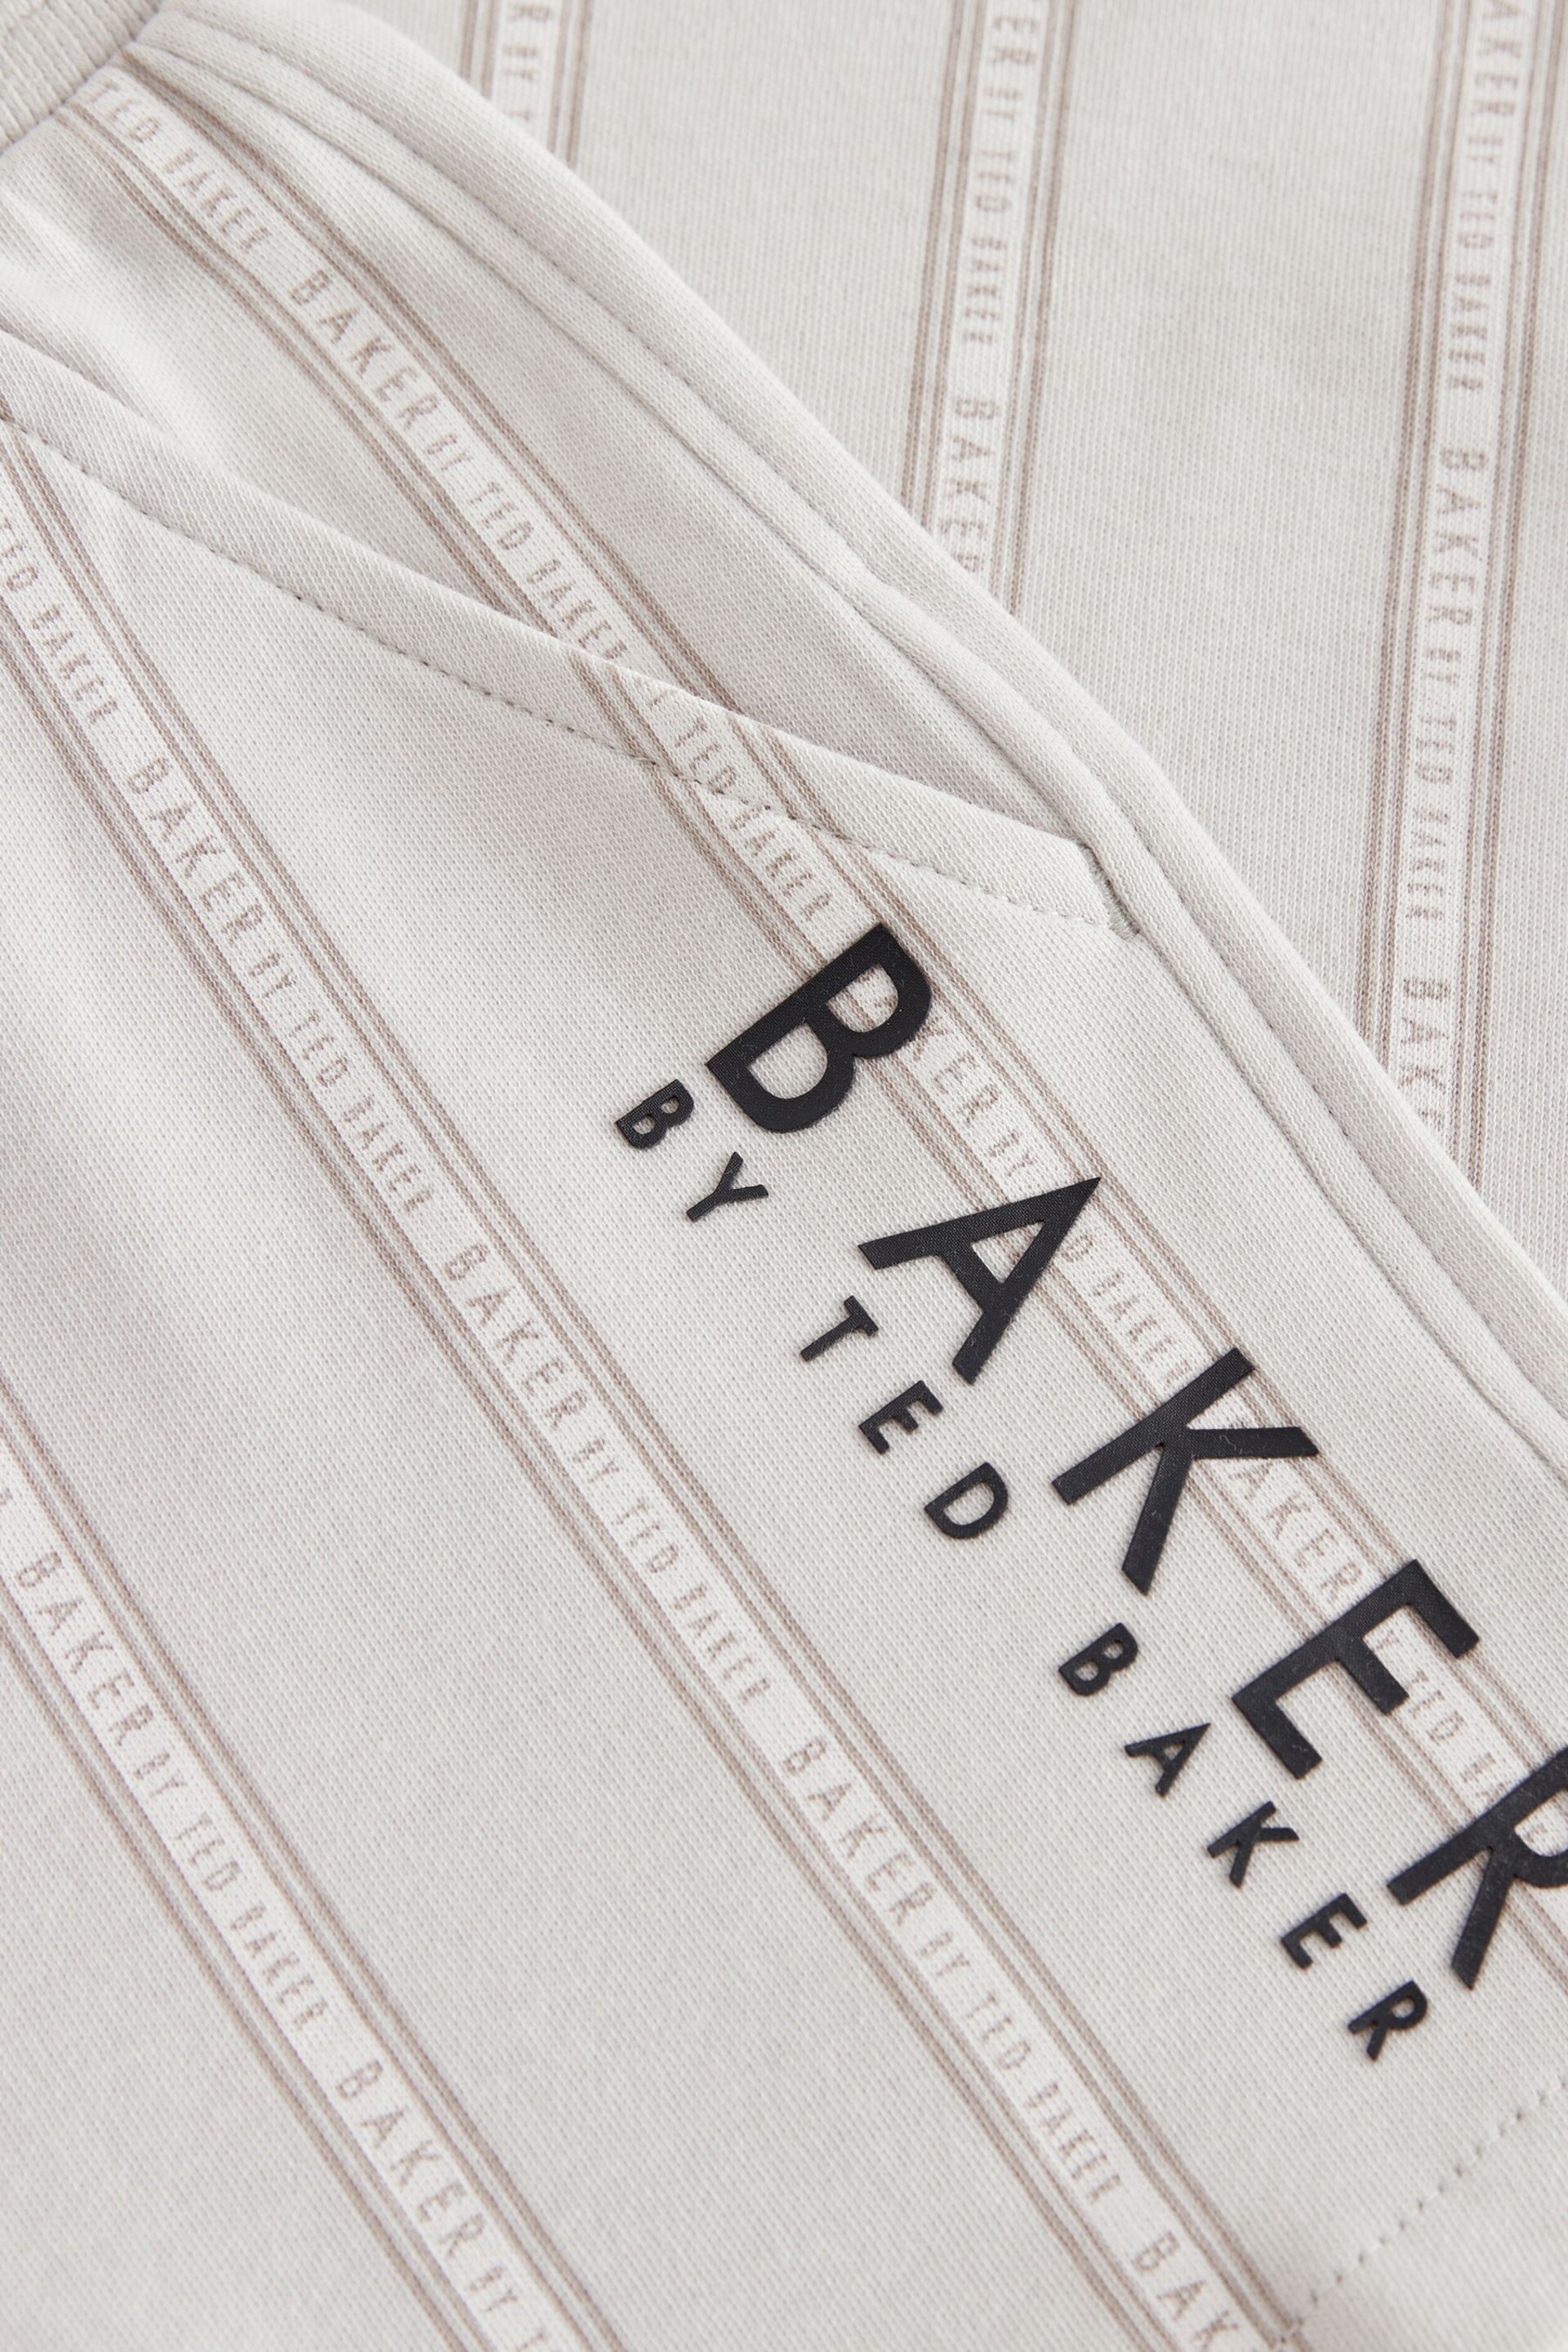 Baker by Ted Baker Striped T-Shirt and Shorts Set - Image 8 of 9